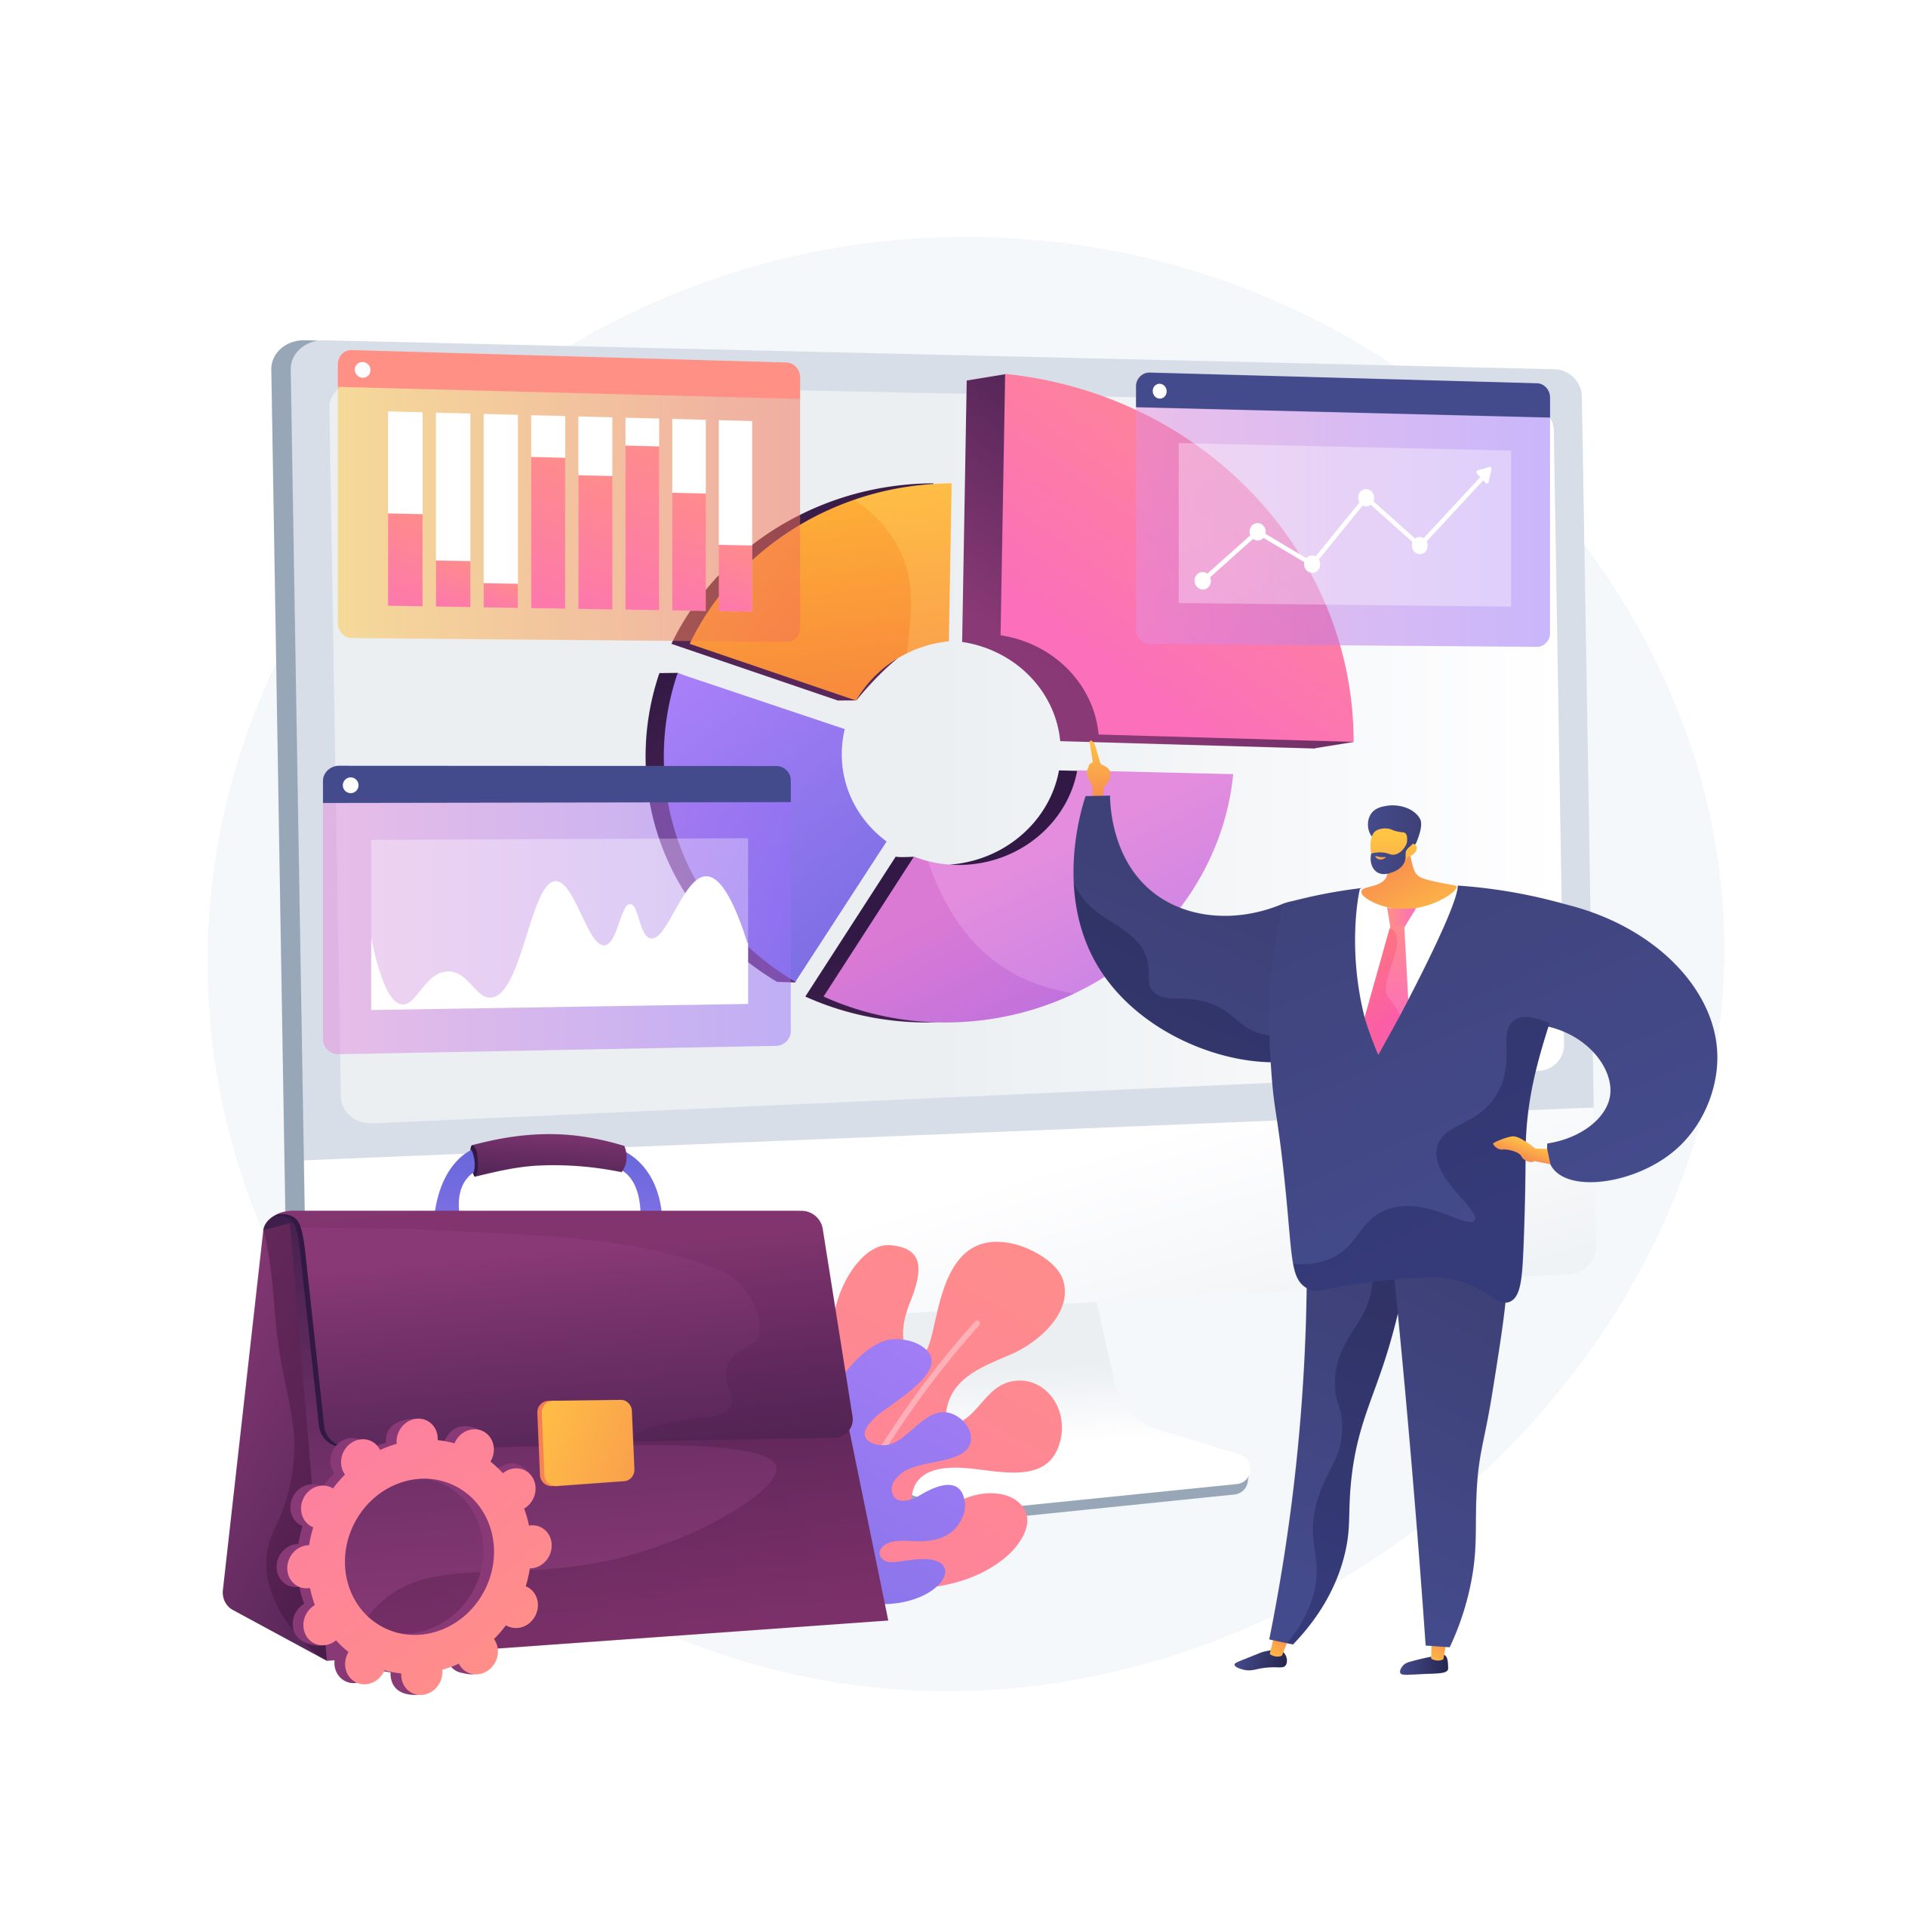 Business information system abstract concept vector illustration. IT infrastructure, business enterprise, transaction processing and automation, eCommerce development, data abstract metaphor.